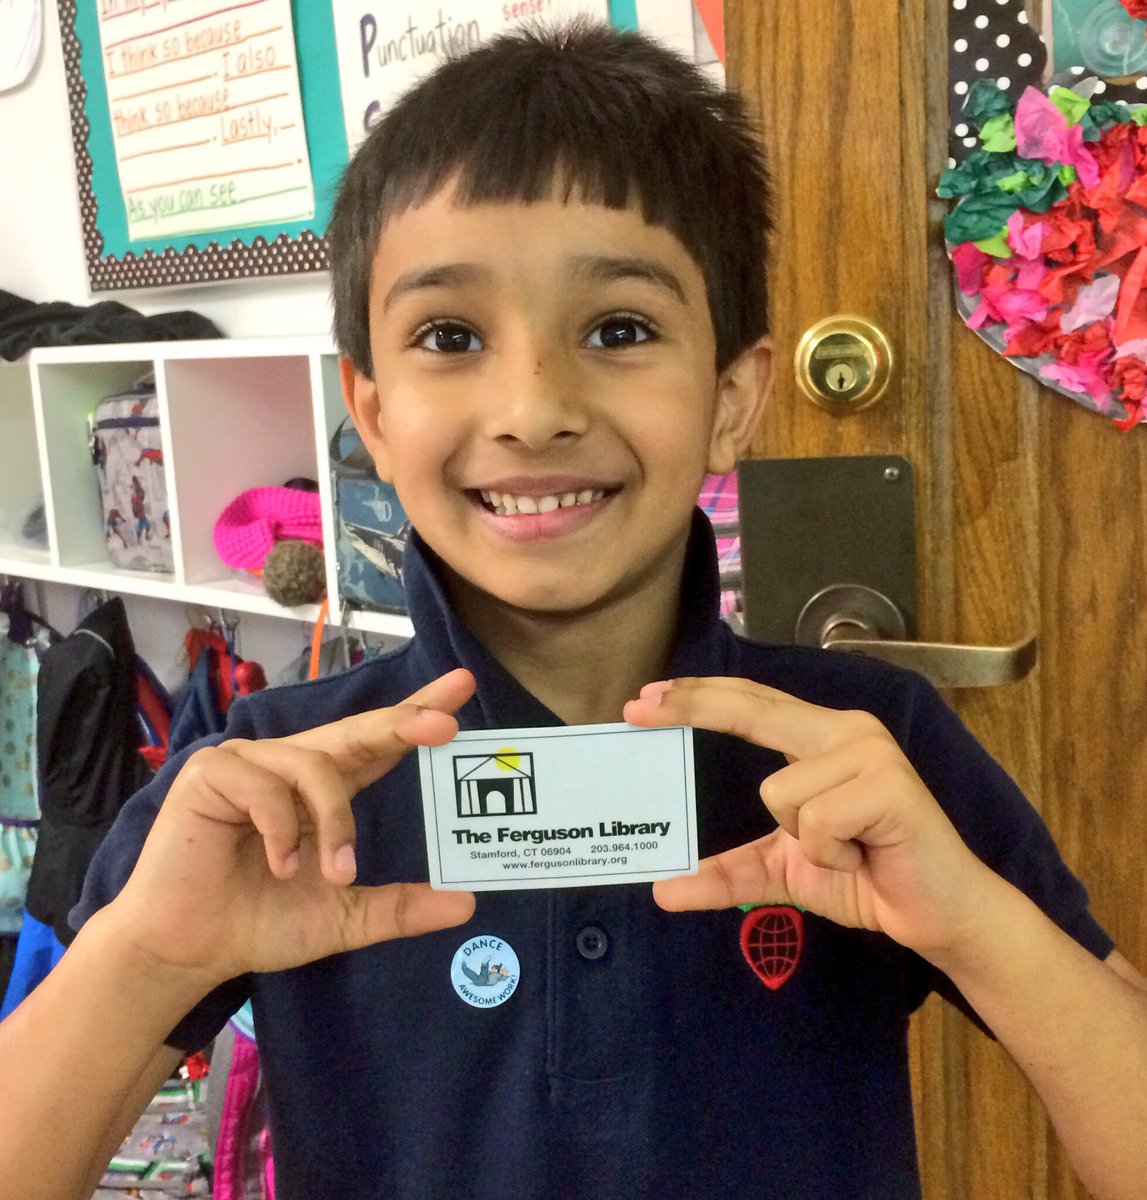 Young patron smiling and holding up his library card